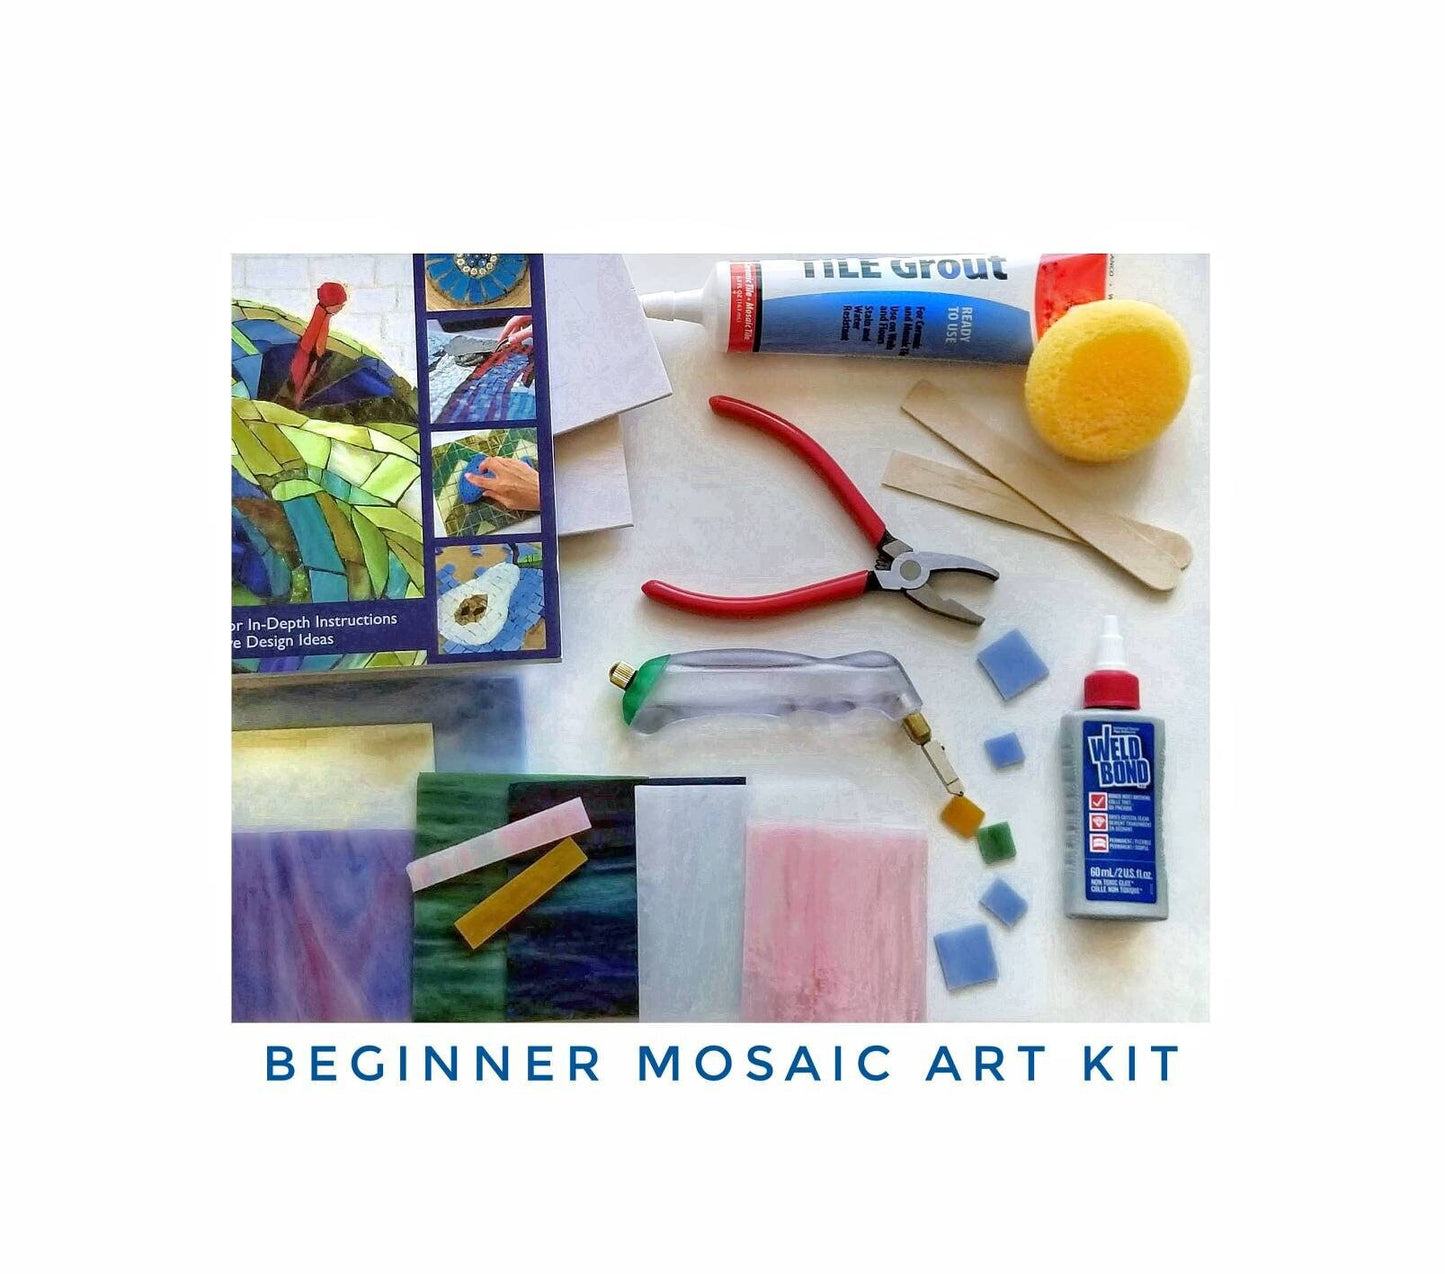 Beginner, Mosaic Art Kit. Stained Glass, Palm Grip Cutter & Guide Book. Pair of Nice Wood Plaques, 8"× 10". Makes a Lovely Gift for Two.